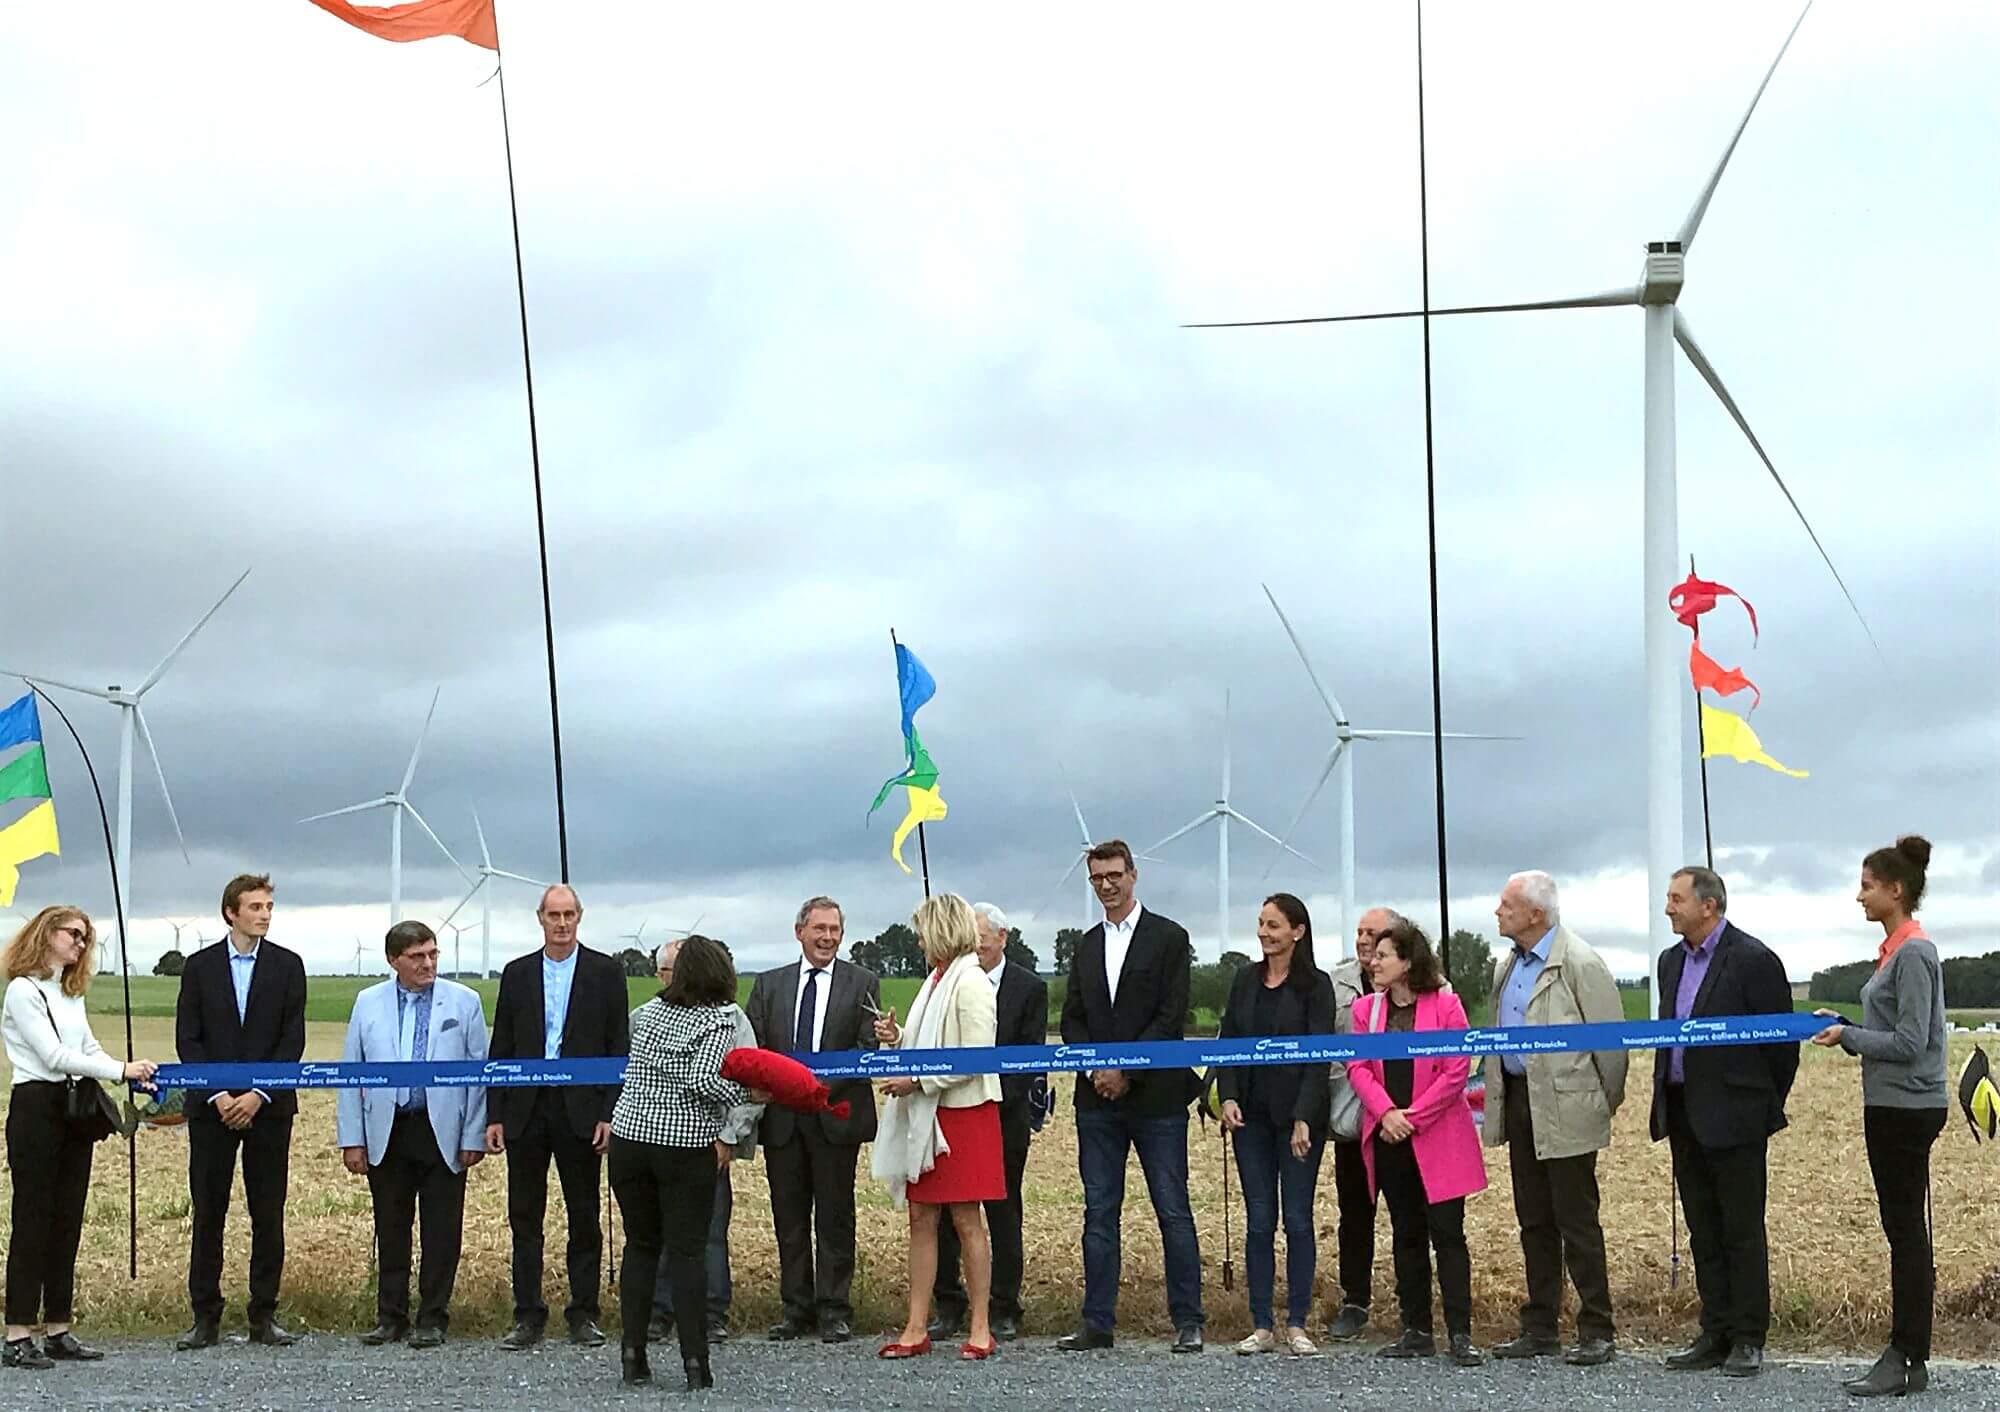 RIVE Private Investment attends the inauguration of the Douiche wind farm